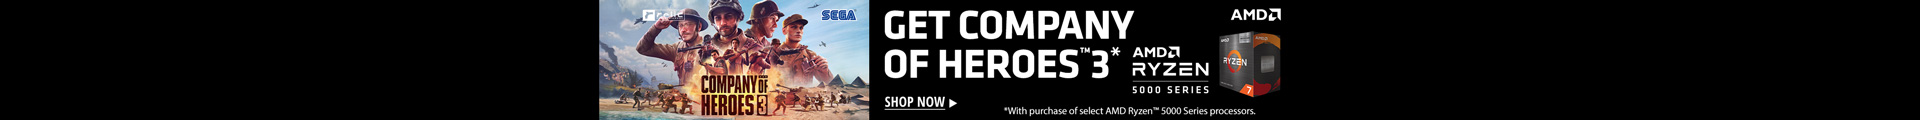 Get Company of Heroes 3